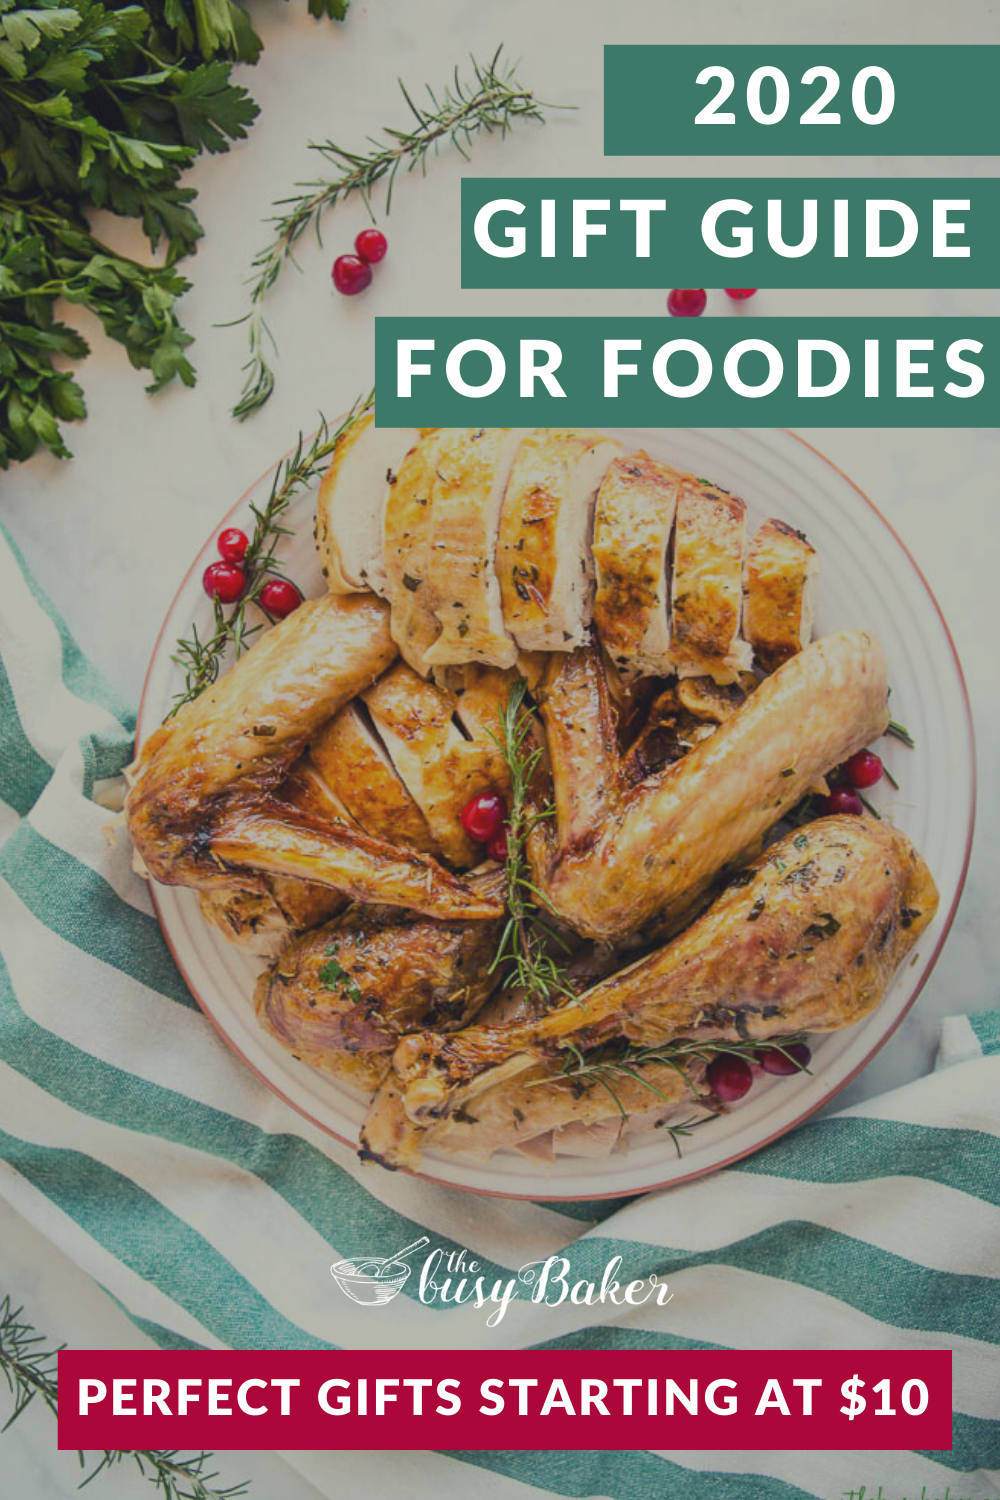 50 Gift Ideas for Foodies!! If you can't decide what to buy for the happy cook or aspiring home chef in your life, look no further for the best foodie gifts everyone on your list will love! thebusybaker.ca #giftguide #foodies #foodgifts #kitchen #baking #cooking #christmas #christmasgifts via @busybakerblog